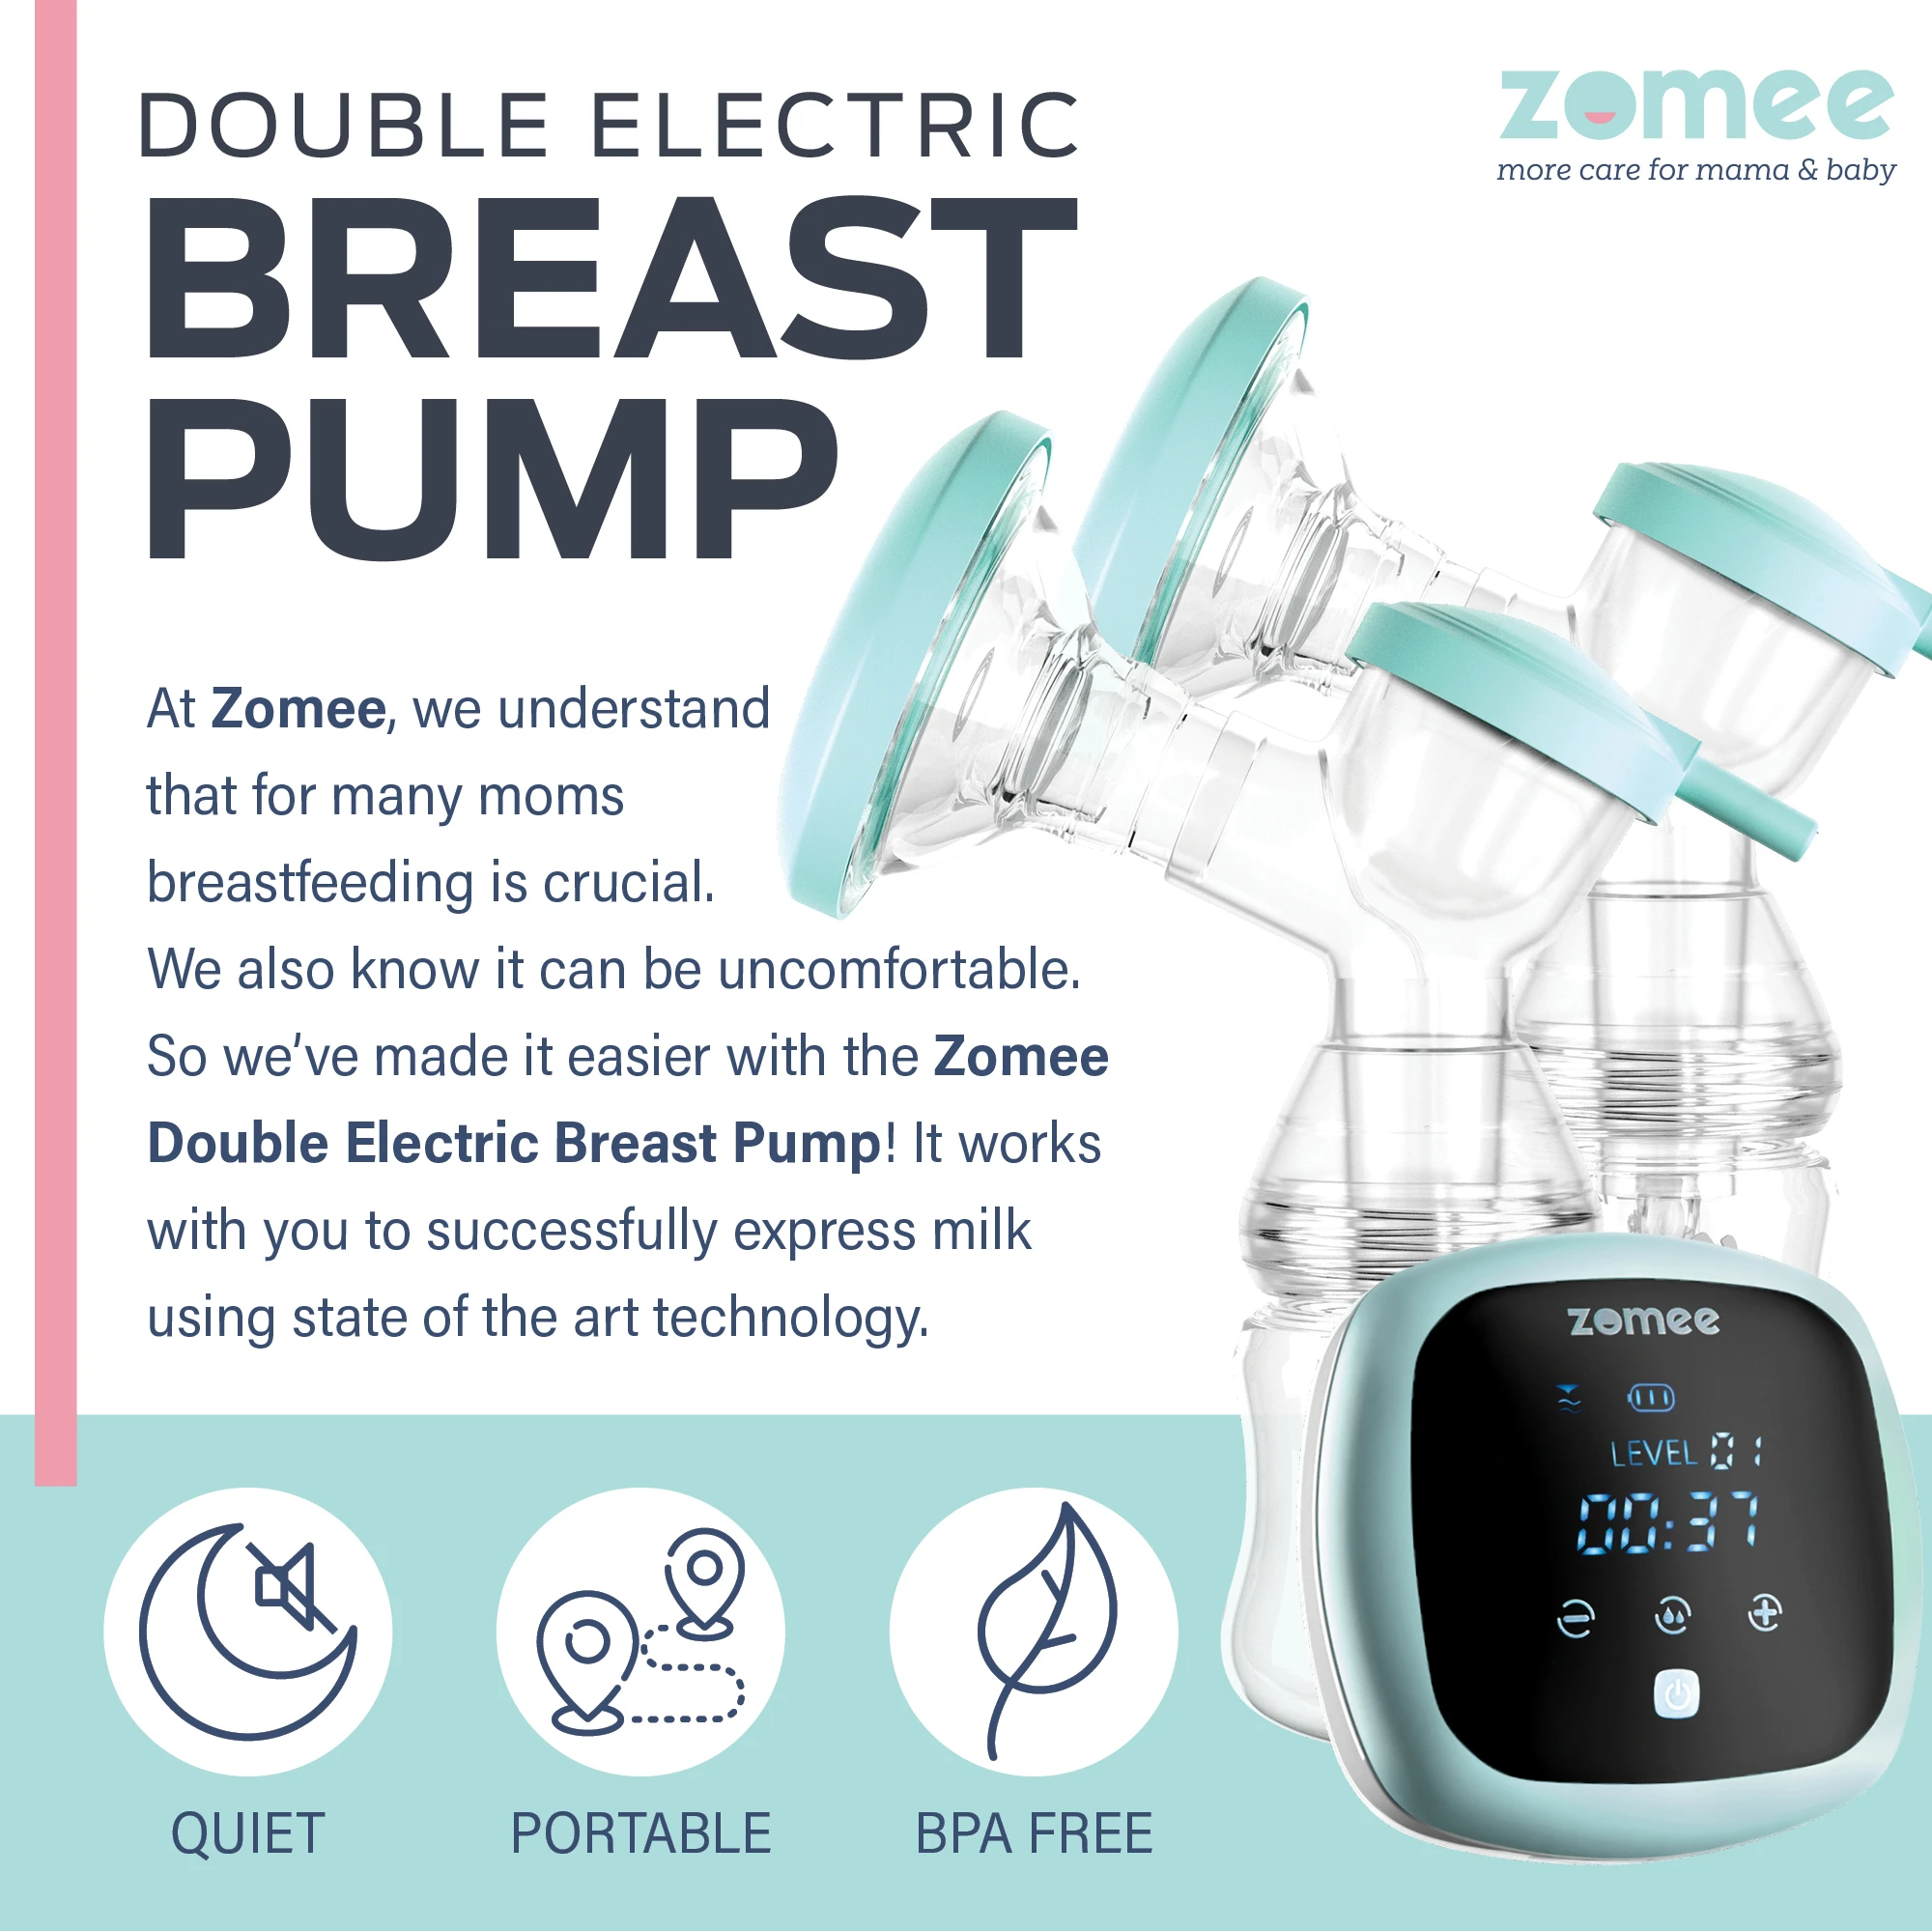 Zomee double electric breast pump infographic